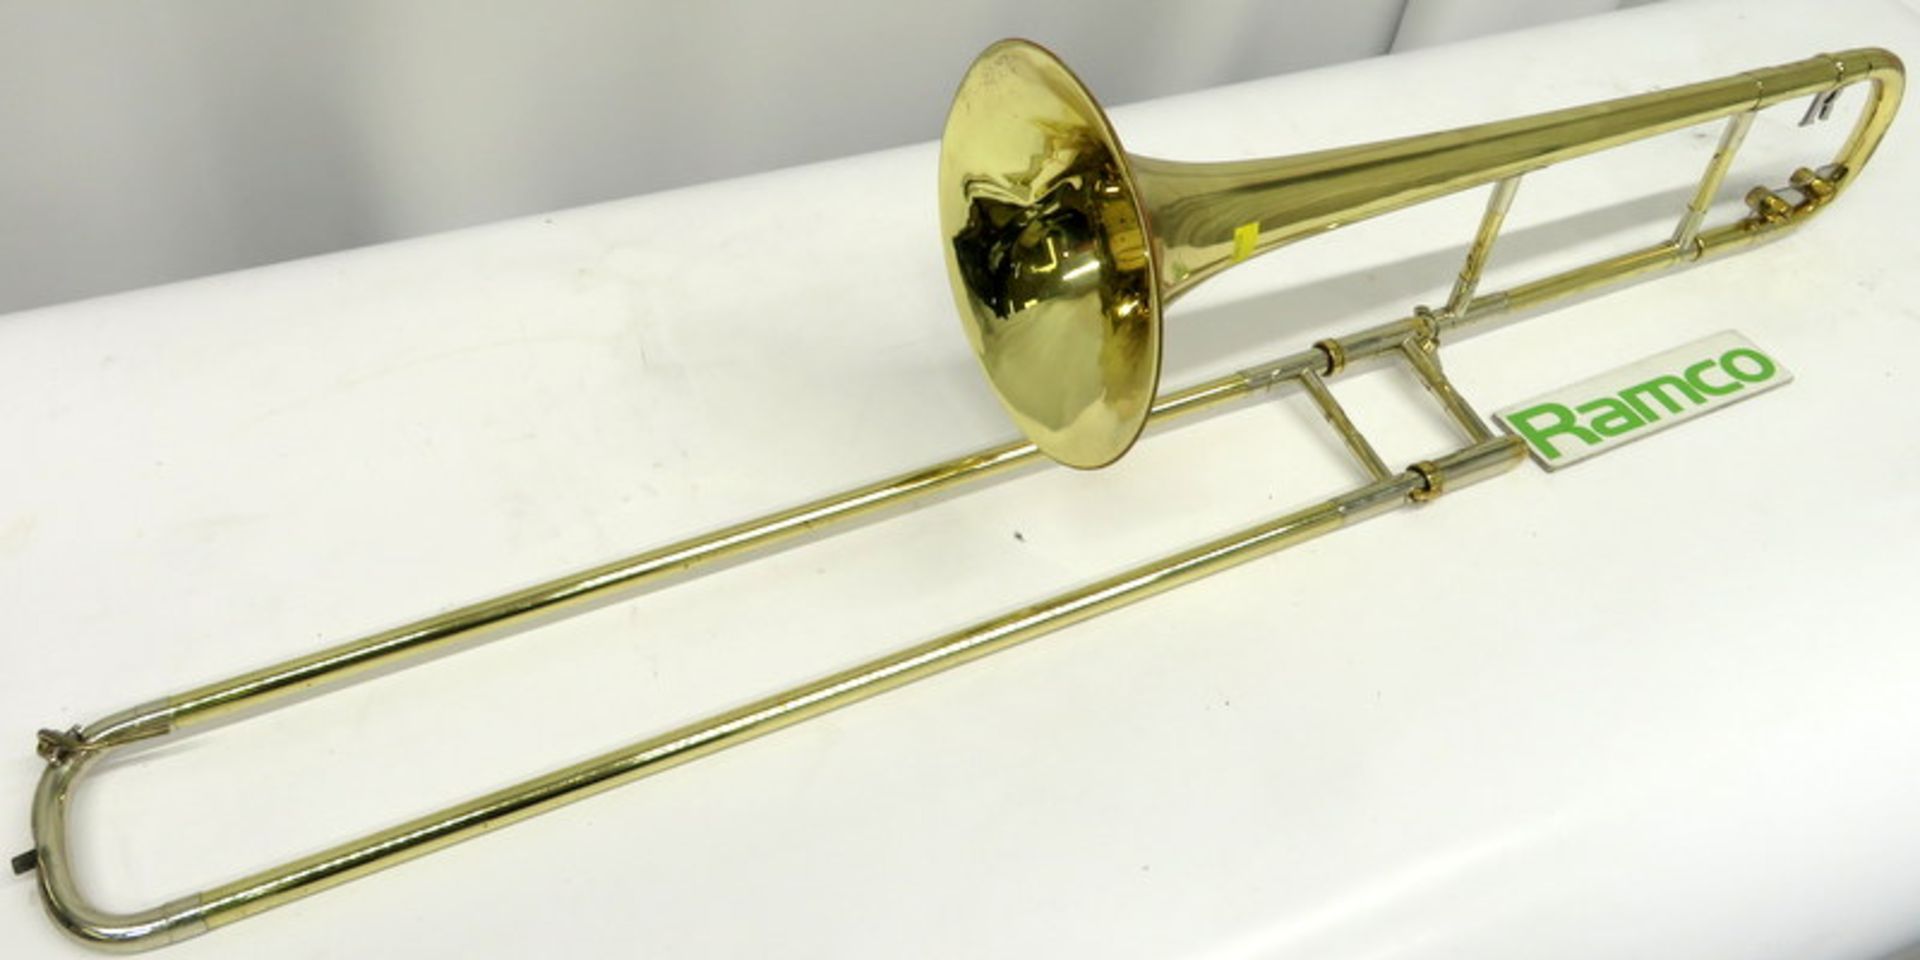 Rath R3 Trombone With Case. Serial Number:028.Please Note That This Item Has Not Be Tested - Image 4 of 15